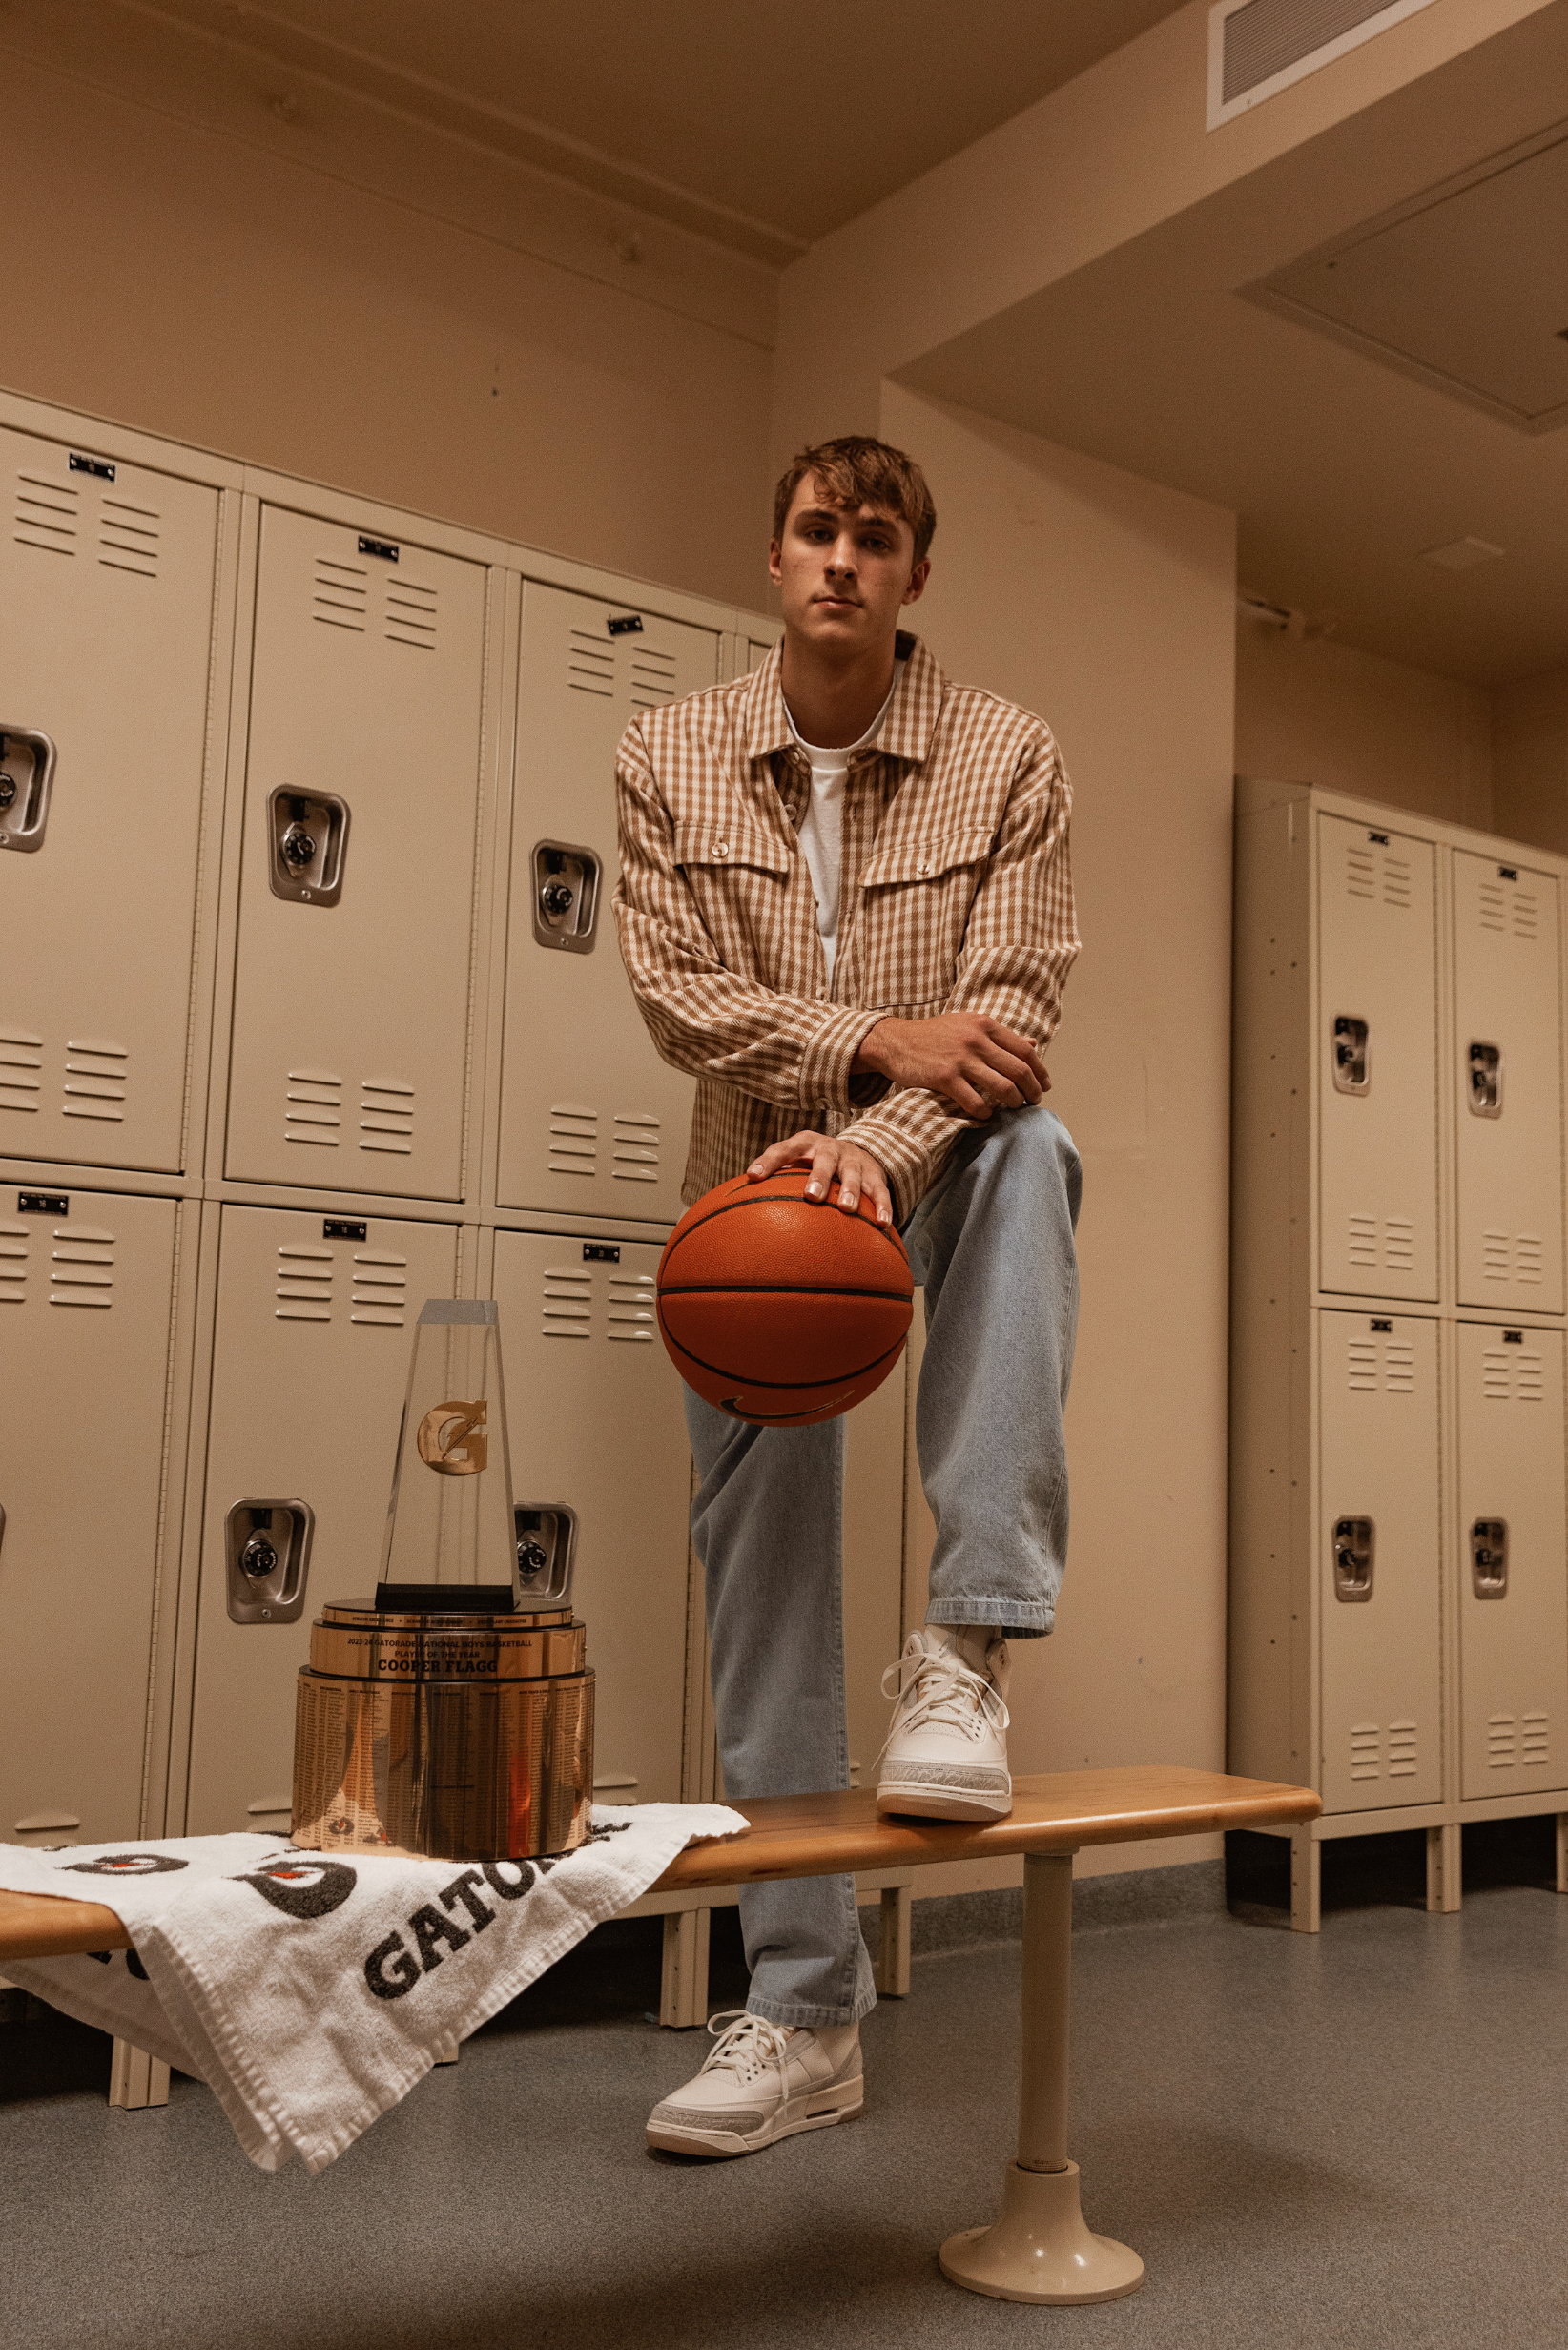 Person in a locker room sitting with a Basketball, wearing plaid jacket and jeans